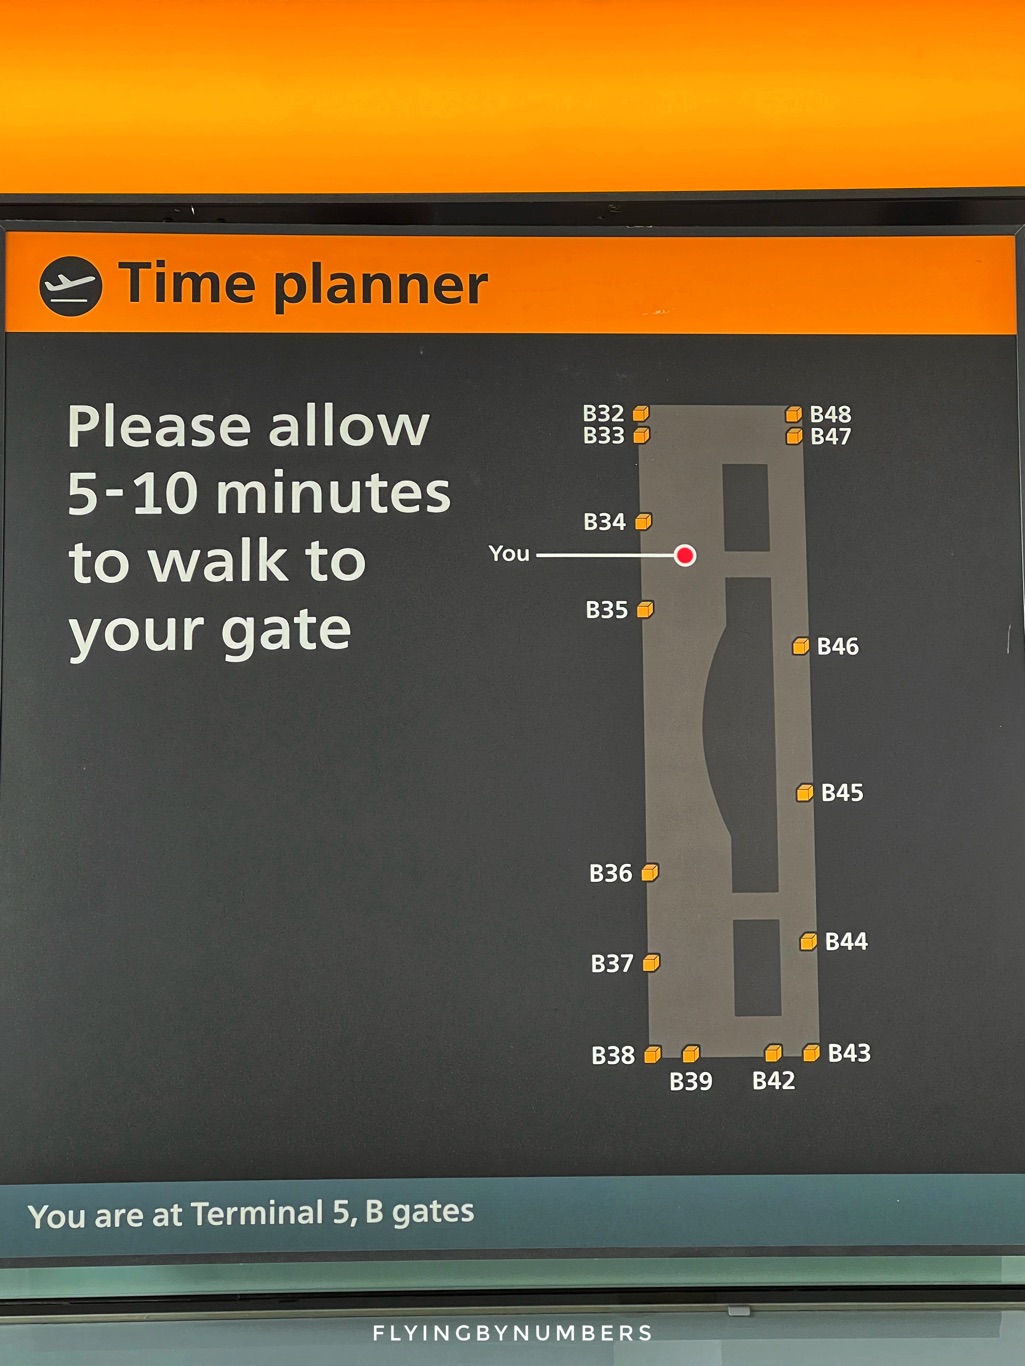 Walking time planner at LHR airport